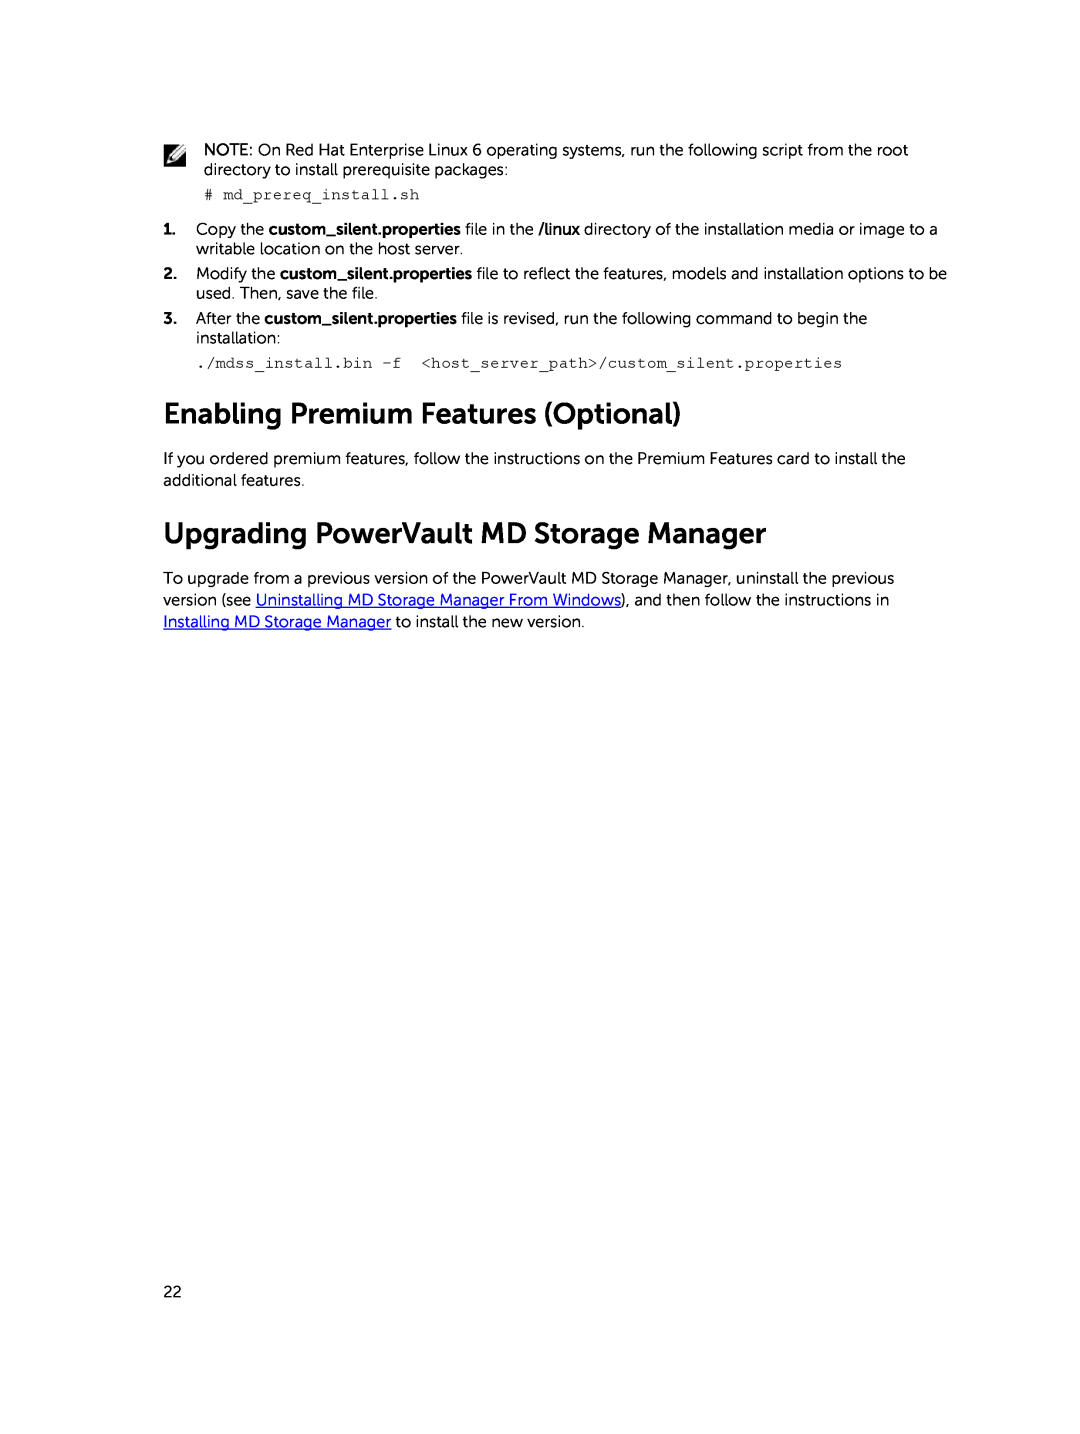 Dell MD3460 manual Enabling Premium Features Optional, Upgrading PowerVault MD Storage Manager, # mdprereqinstall.sh 